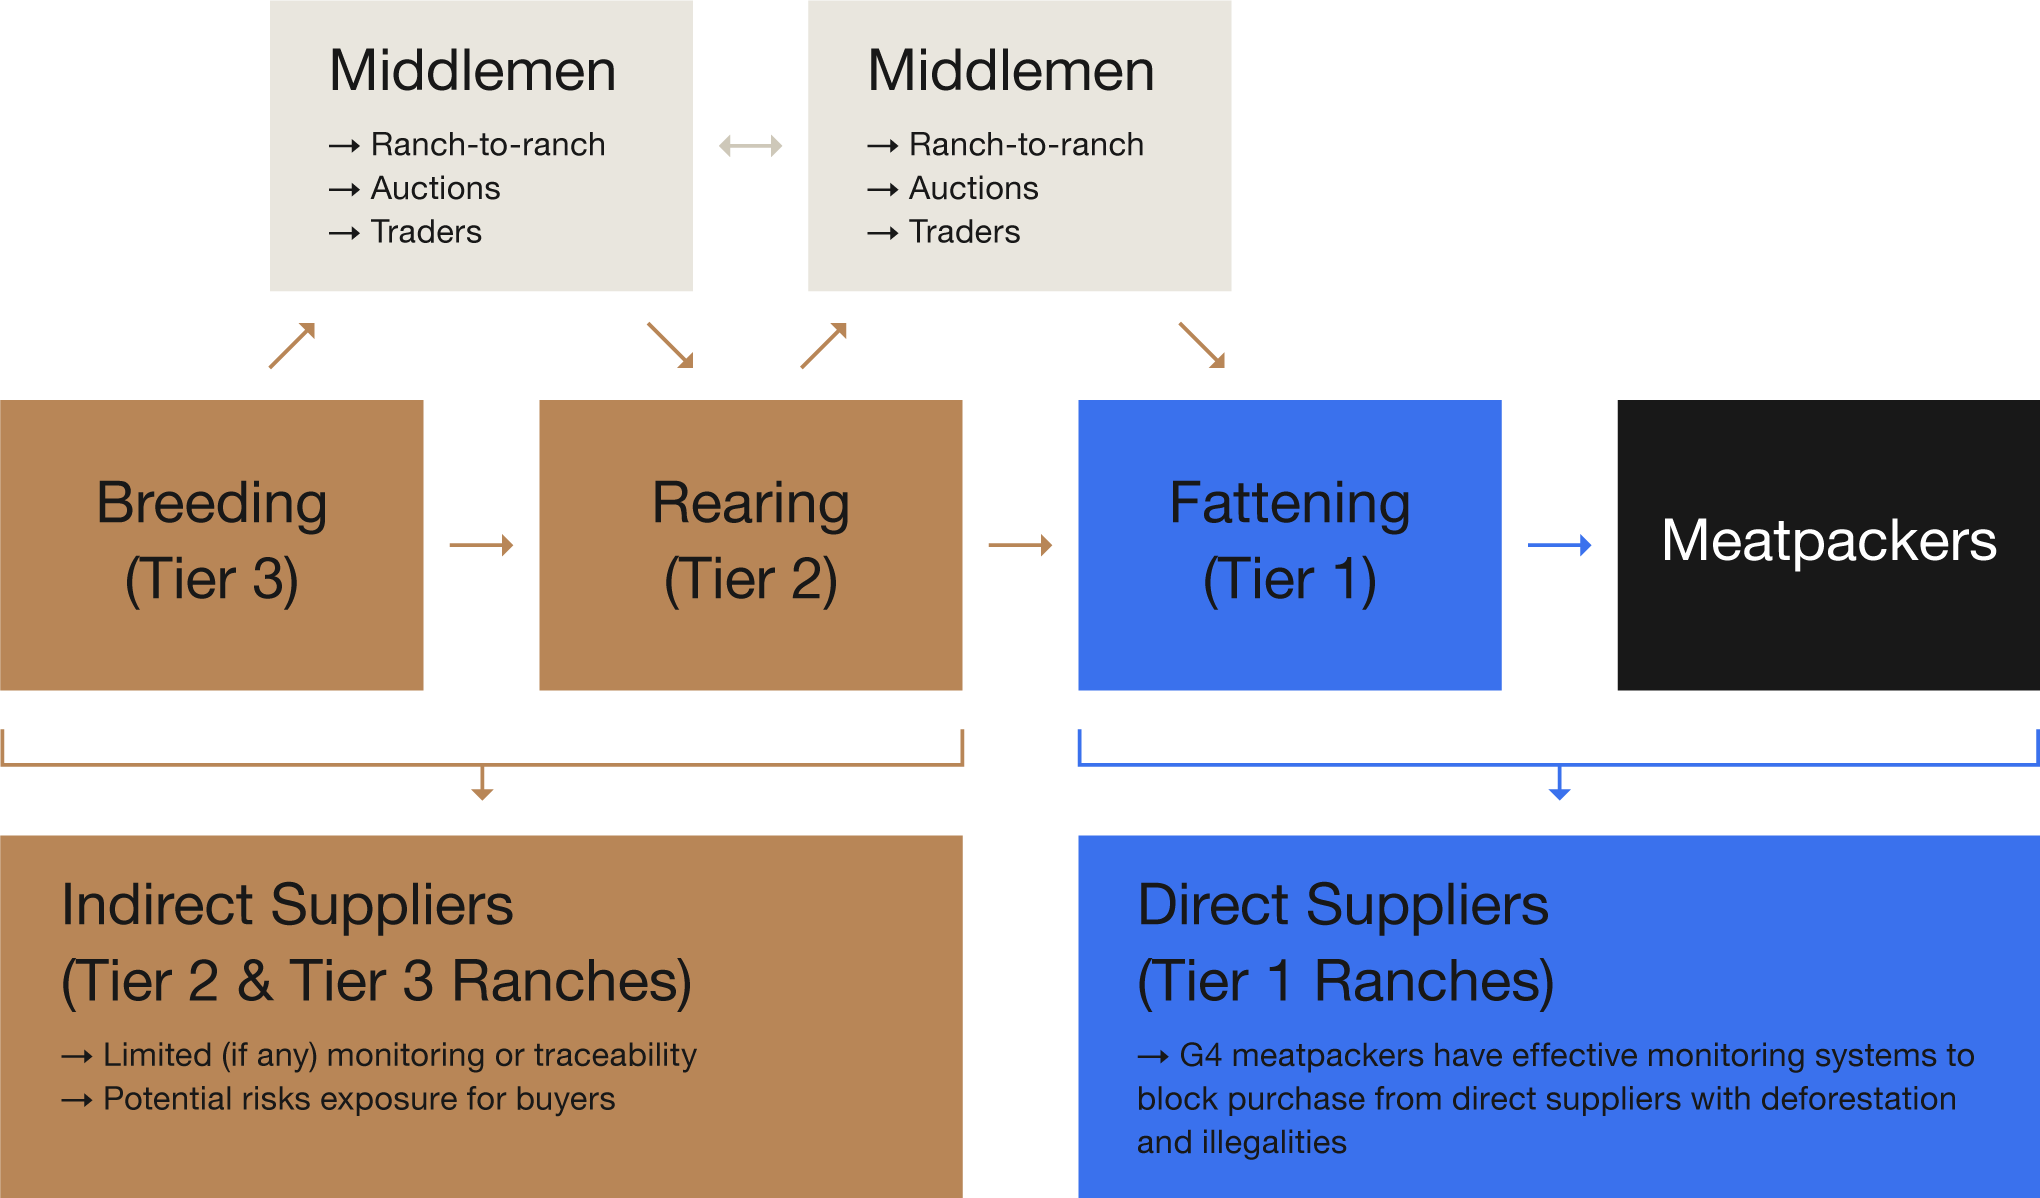 Flow-Direct-vs.-Indirect-Suppliers-1